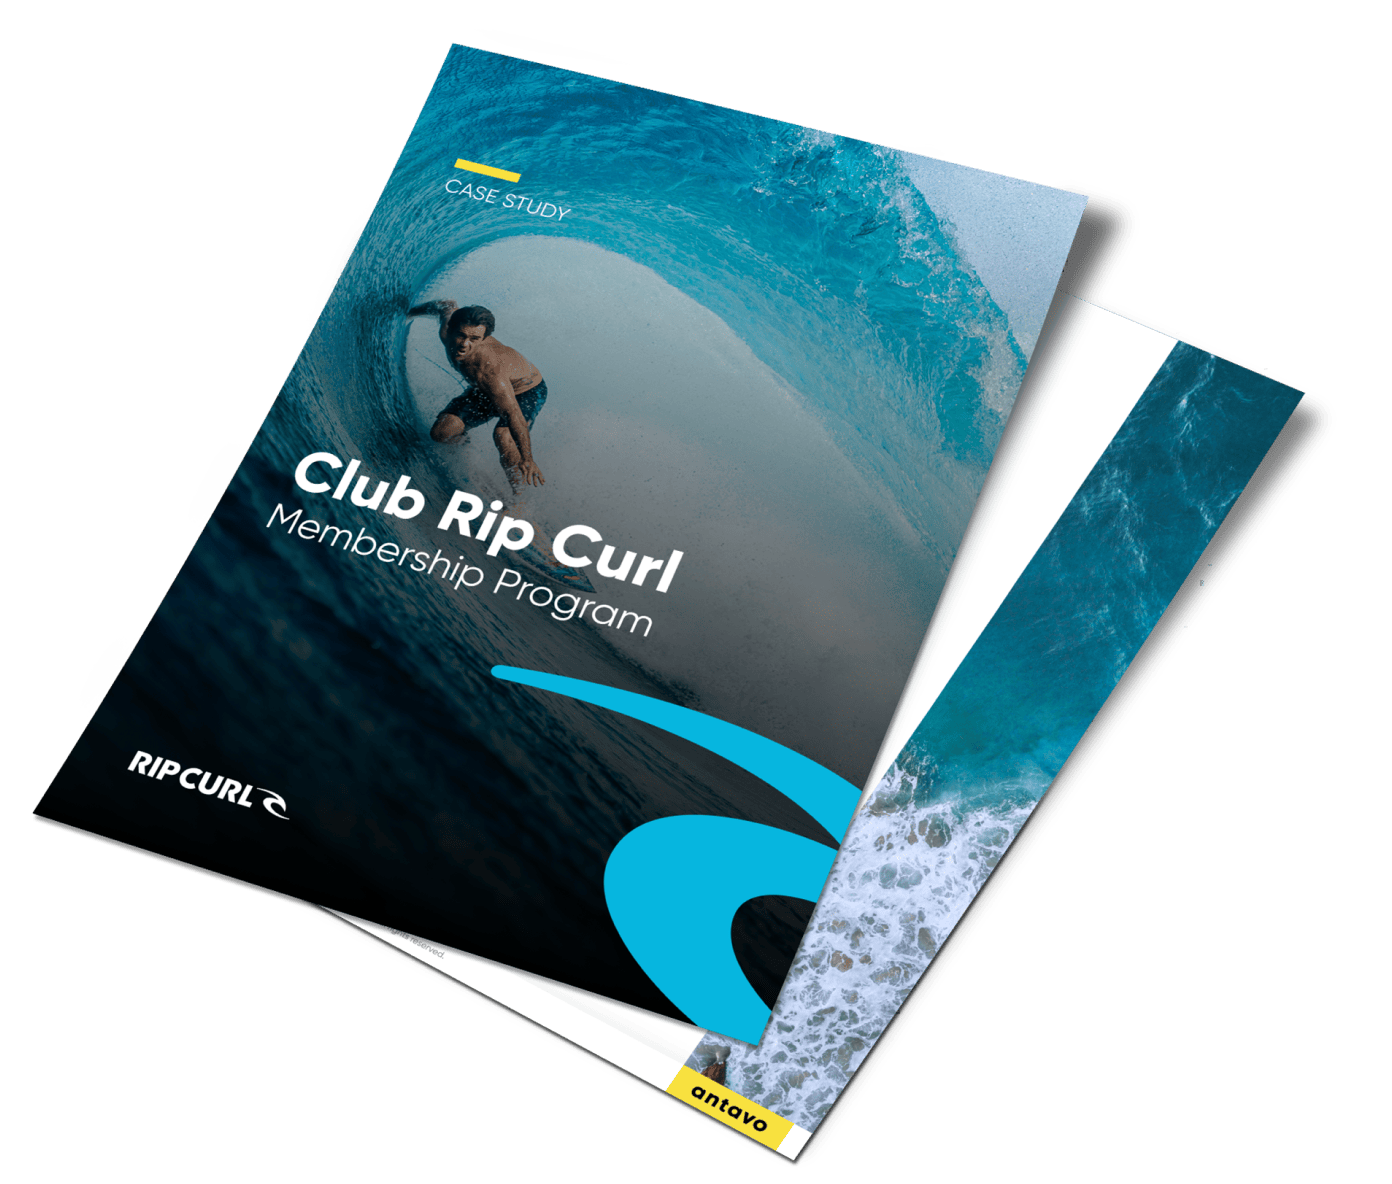 Antavo's case study for Rip Curl Loyalty Programs.